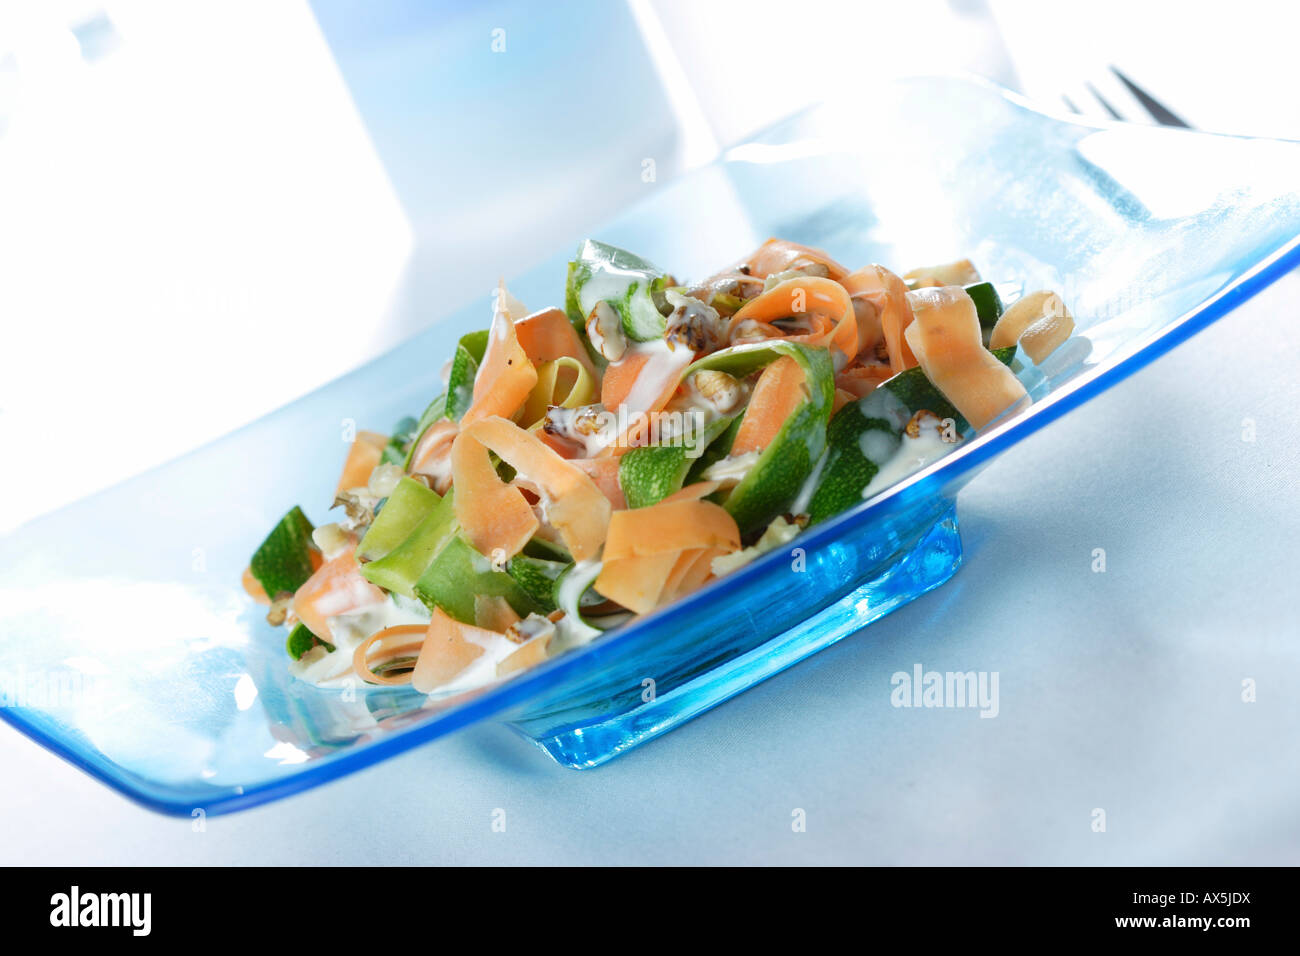 Salad with zucchini, carrots, pieces of walnut and yoghurt dressing Stock Photo